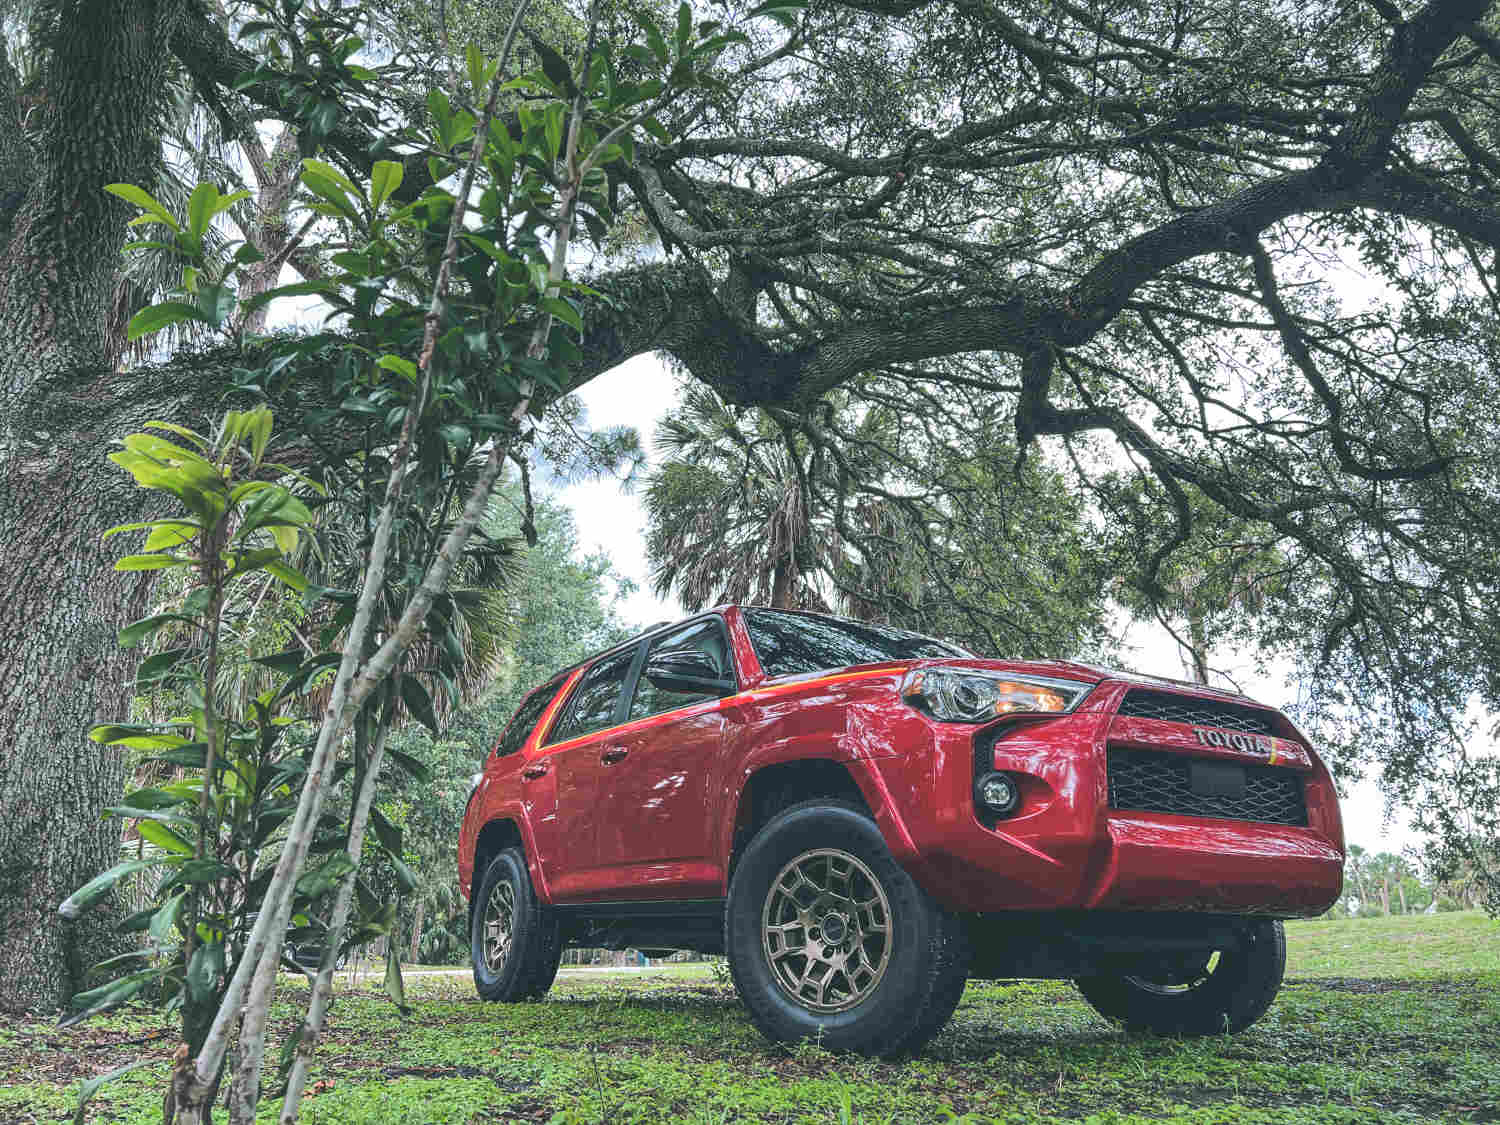 The Toyota 4Runner in the grass